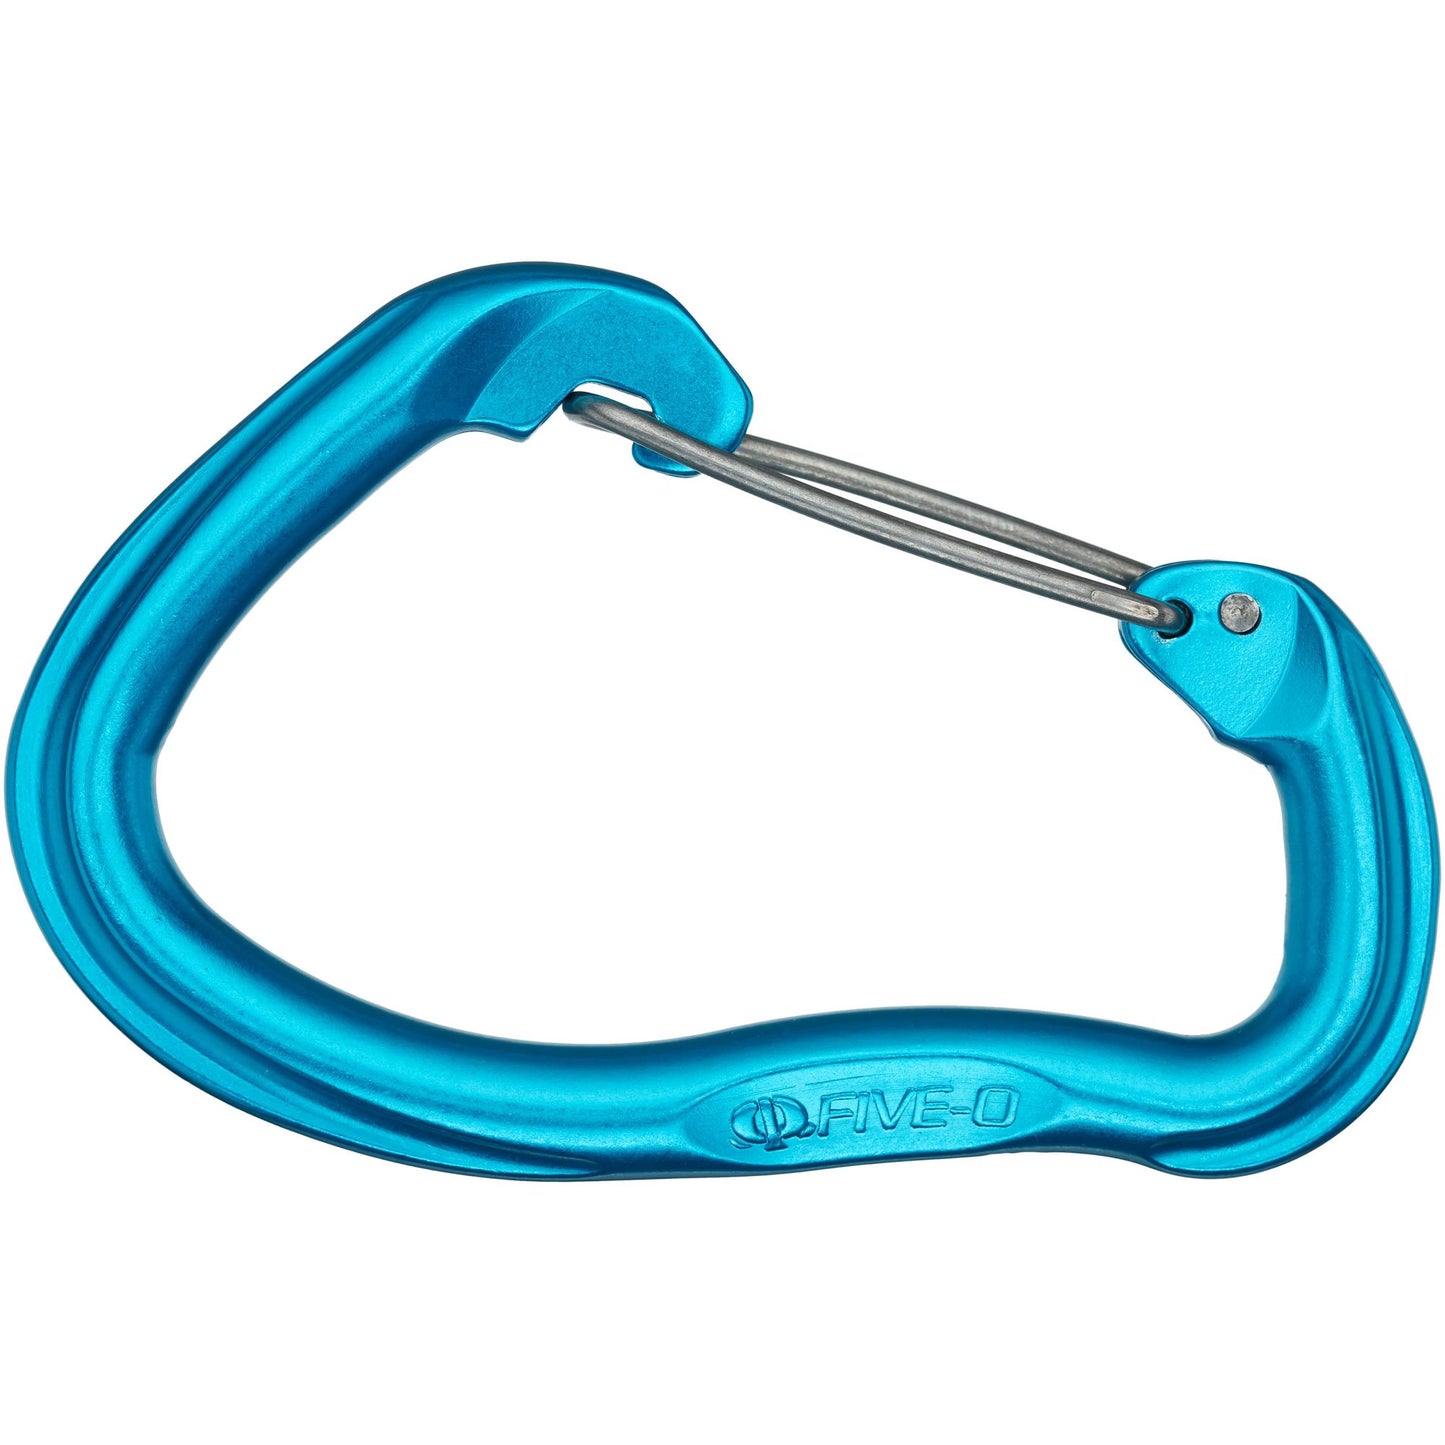 NRS Omega Five-0 Wire Gate Carabiner